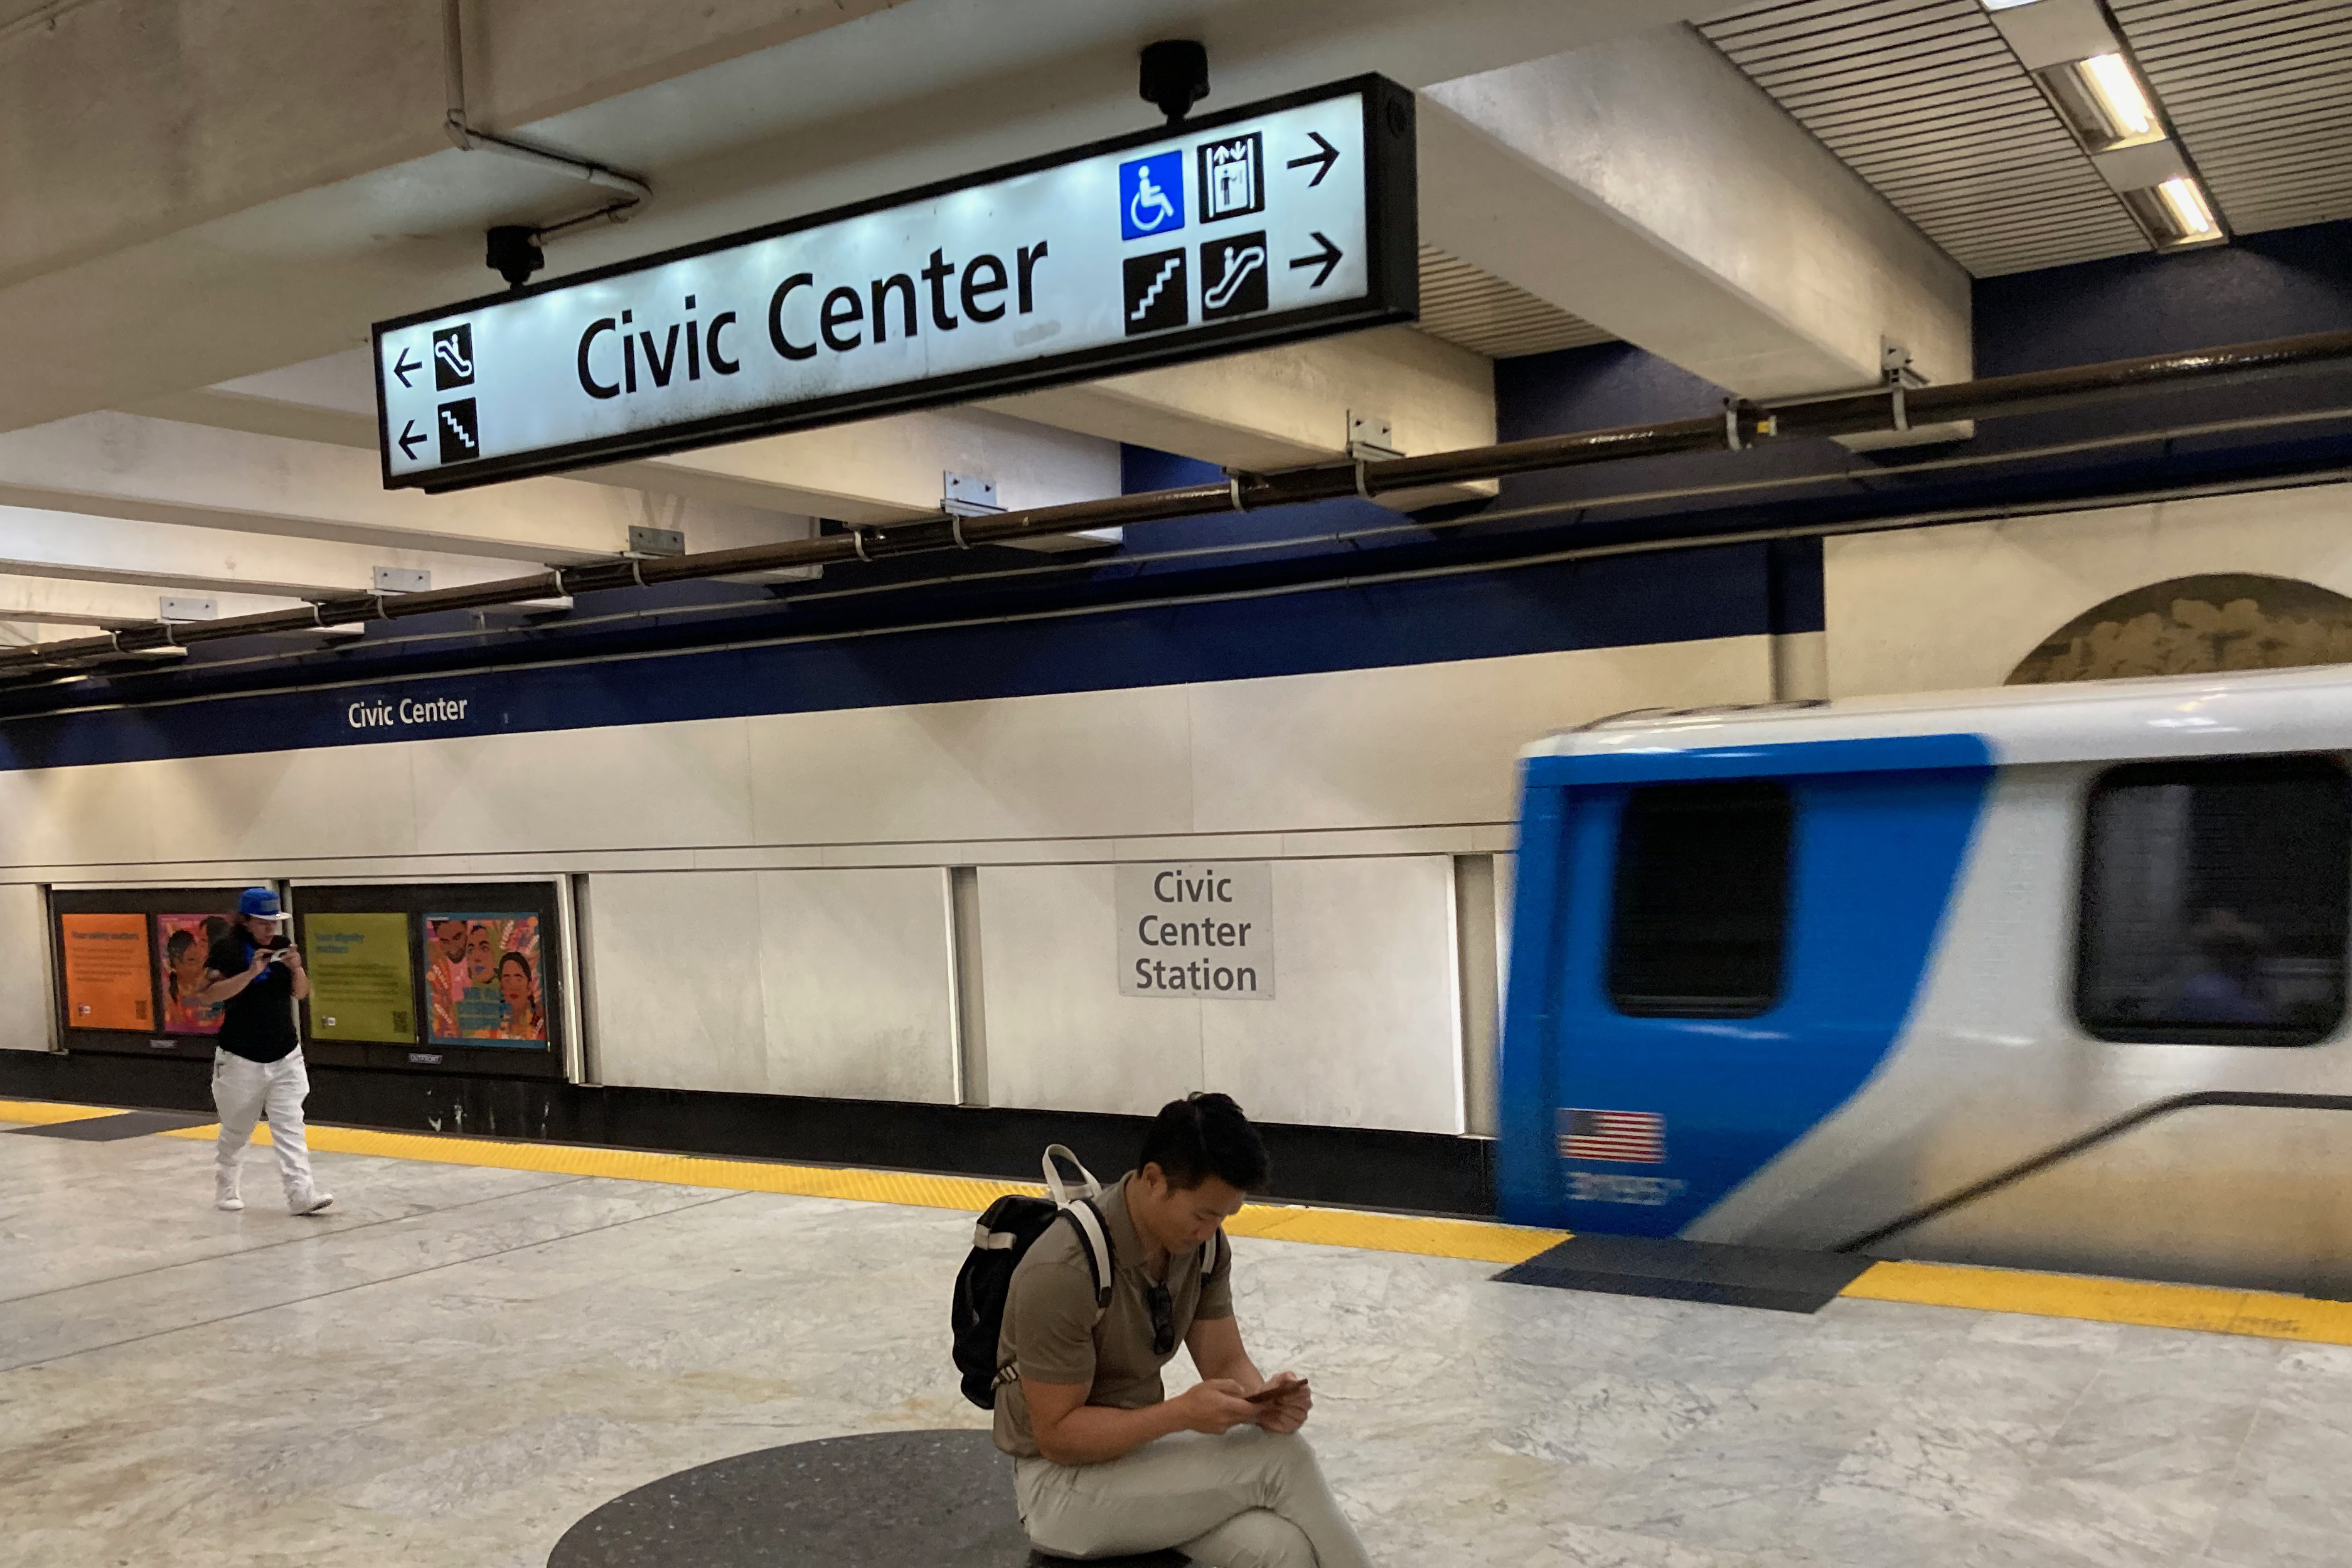 Passengers wait for BART trains on the platform at Civic Center Station in Downtown San Francisco on Friday, Sept. 8, 2023. Bay Area Rapid Transit (BART) has seen a recent increase in ridership following months of declining ridership during the COVID pandemic.